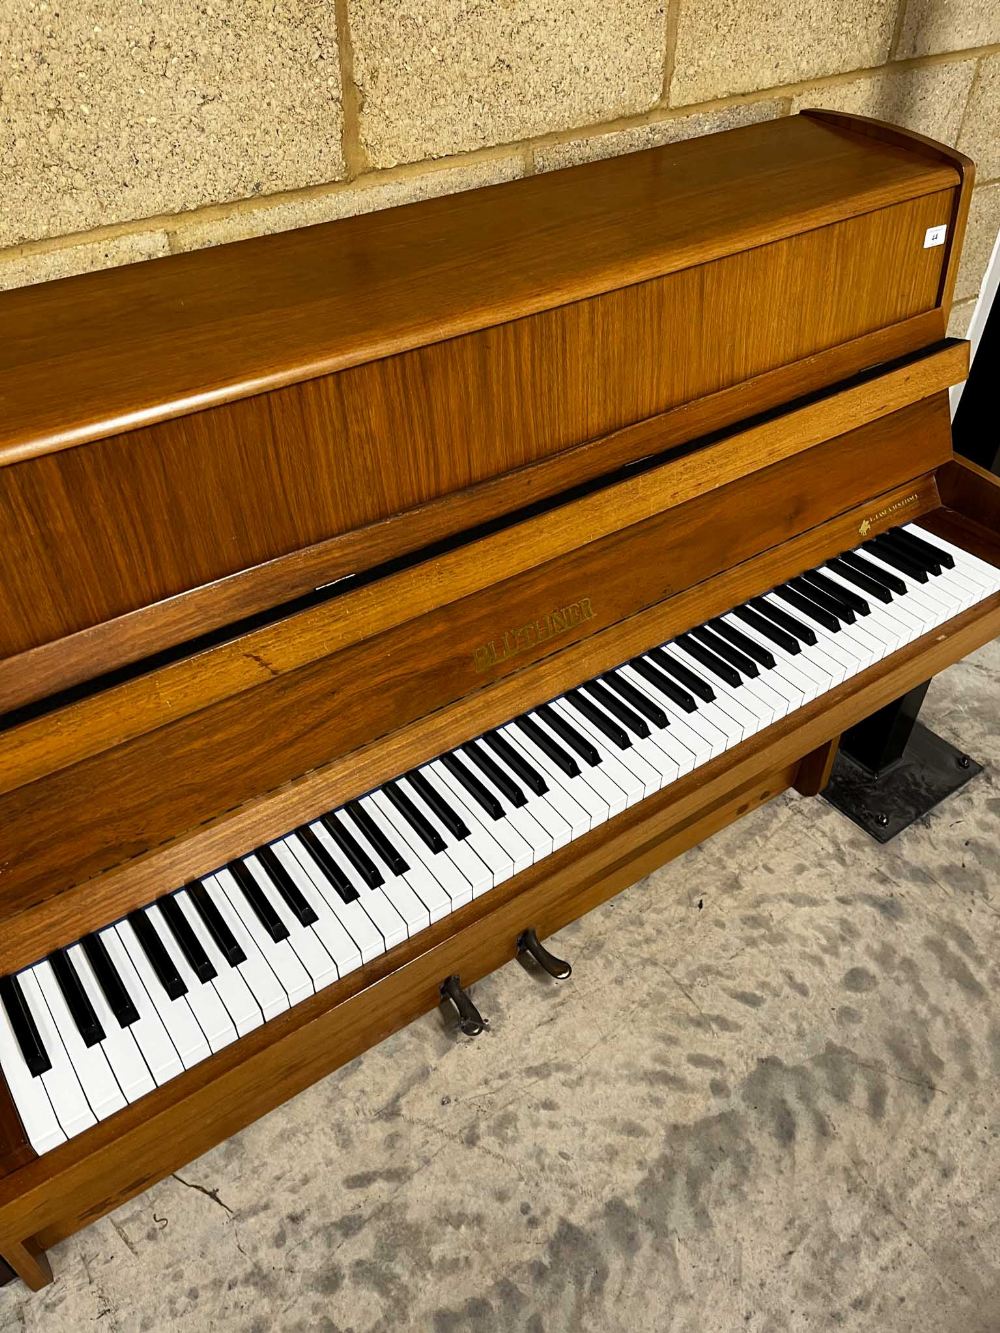 Blüthner (c1976) A Model 112 upright piano in a modern style walnut case. - Image 2 of 4